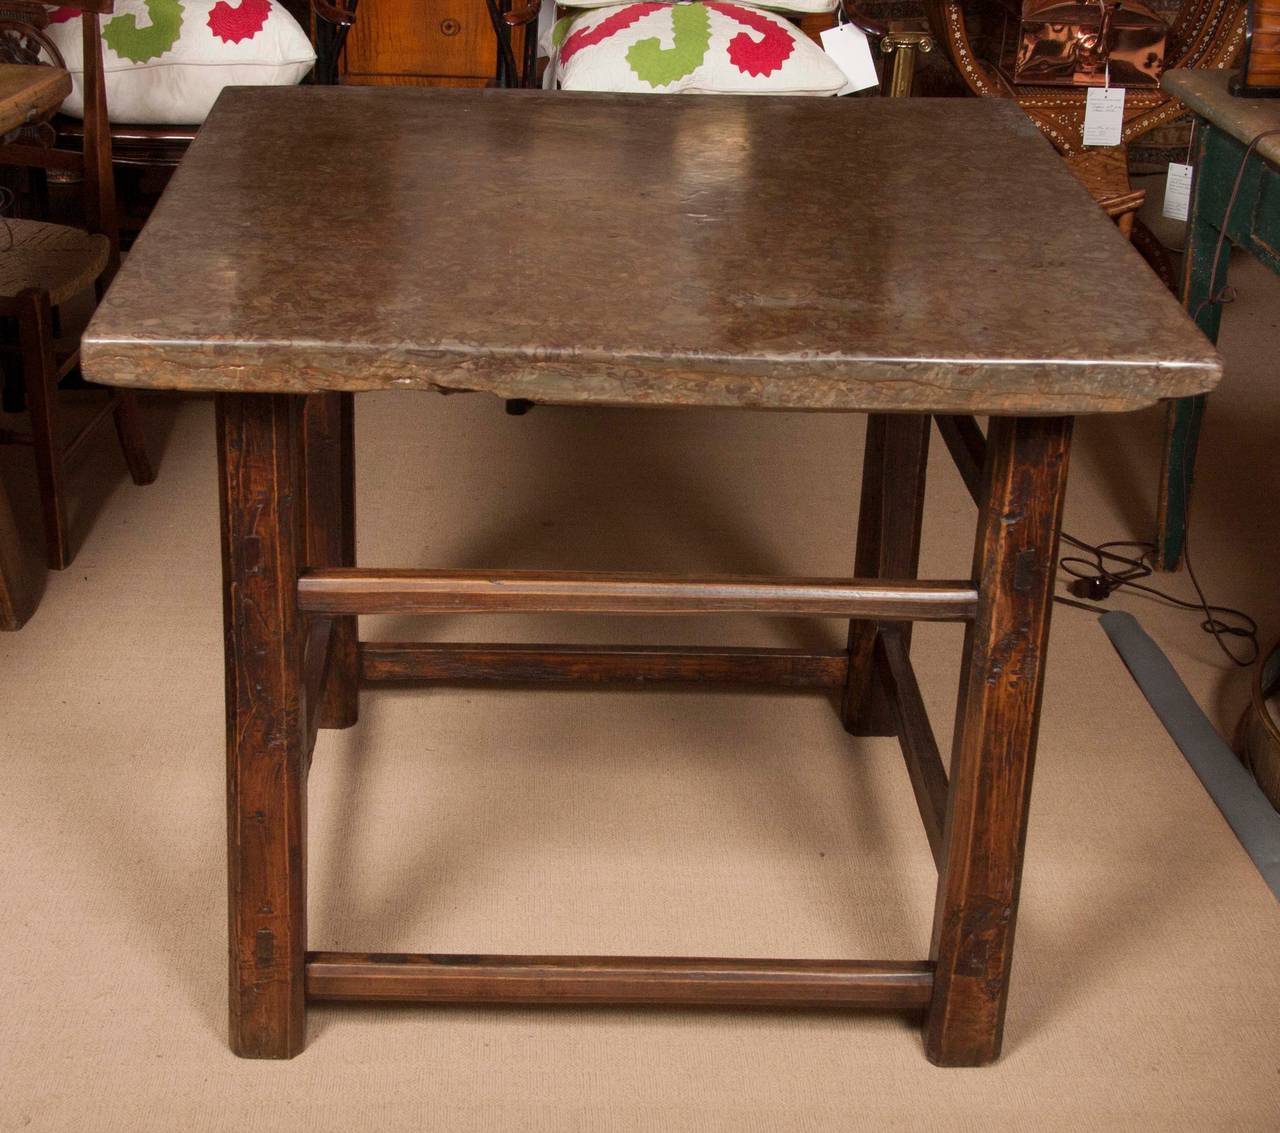 A striking newly polished stone top surmounting an antique Asian elmwood table base.